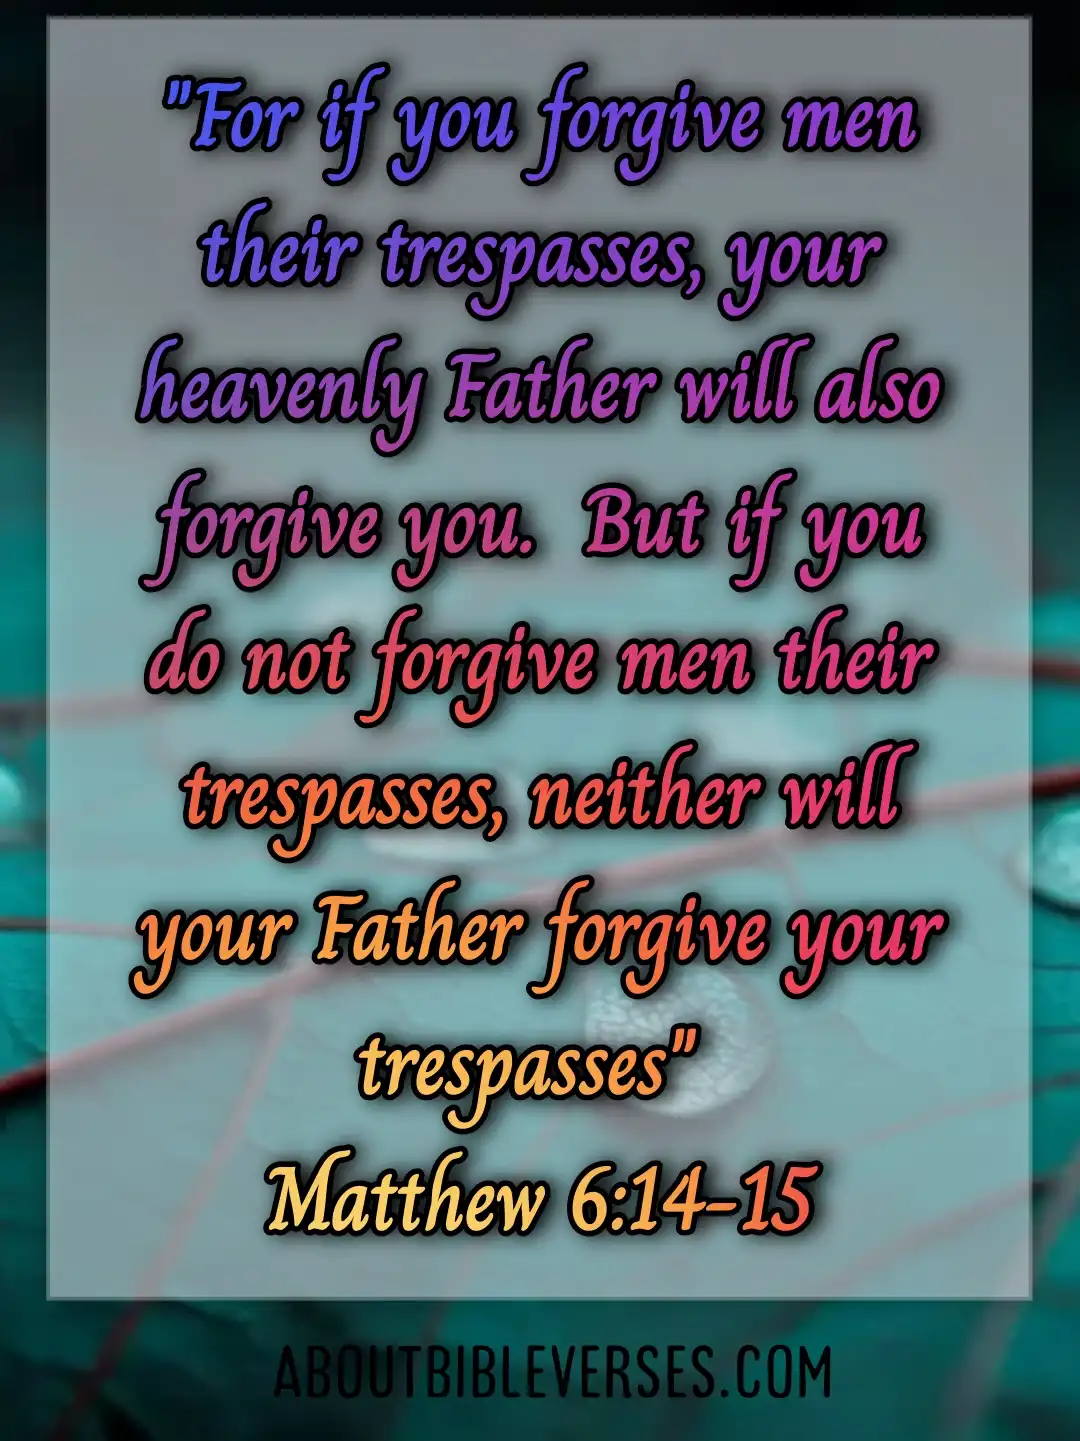 Bible Verses About Forgiving Others Who Hurt You (Matthew 6:14-15)